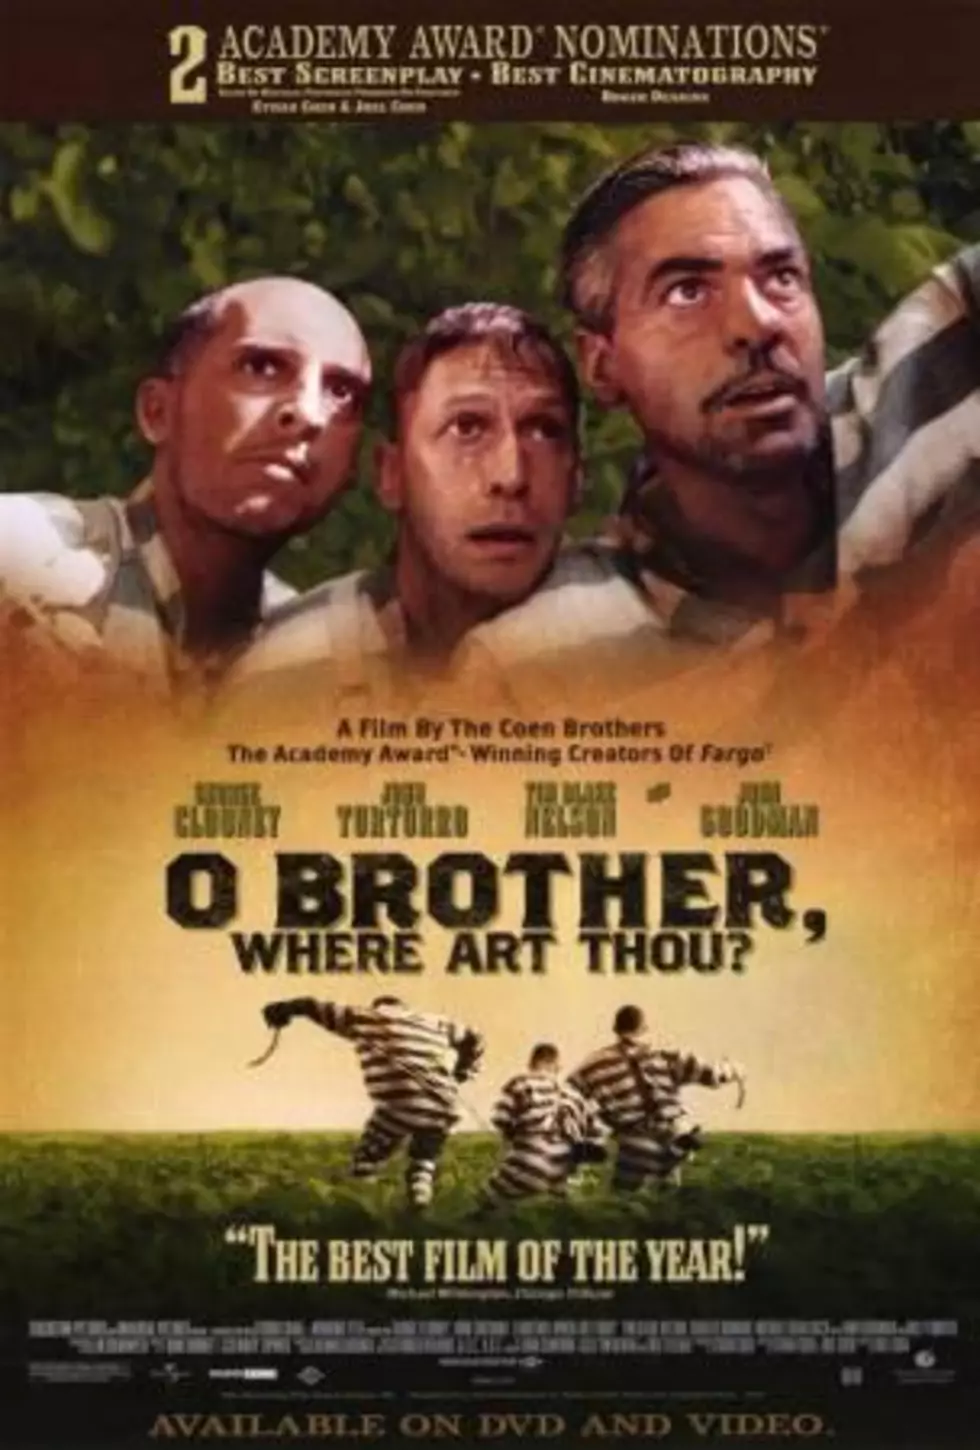 Tiffany’s Spoiler Movie Review: “O Brother, Where Art Thou?”